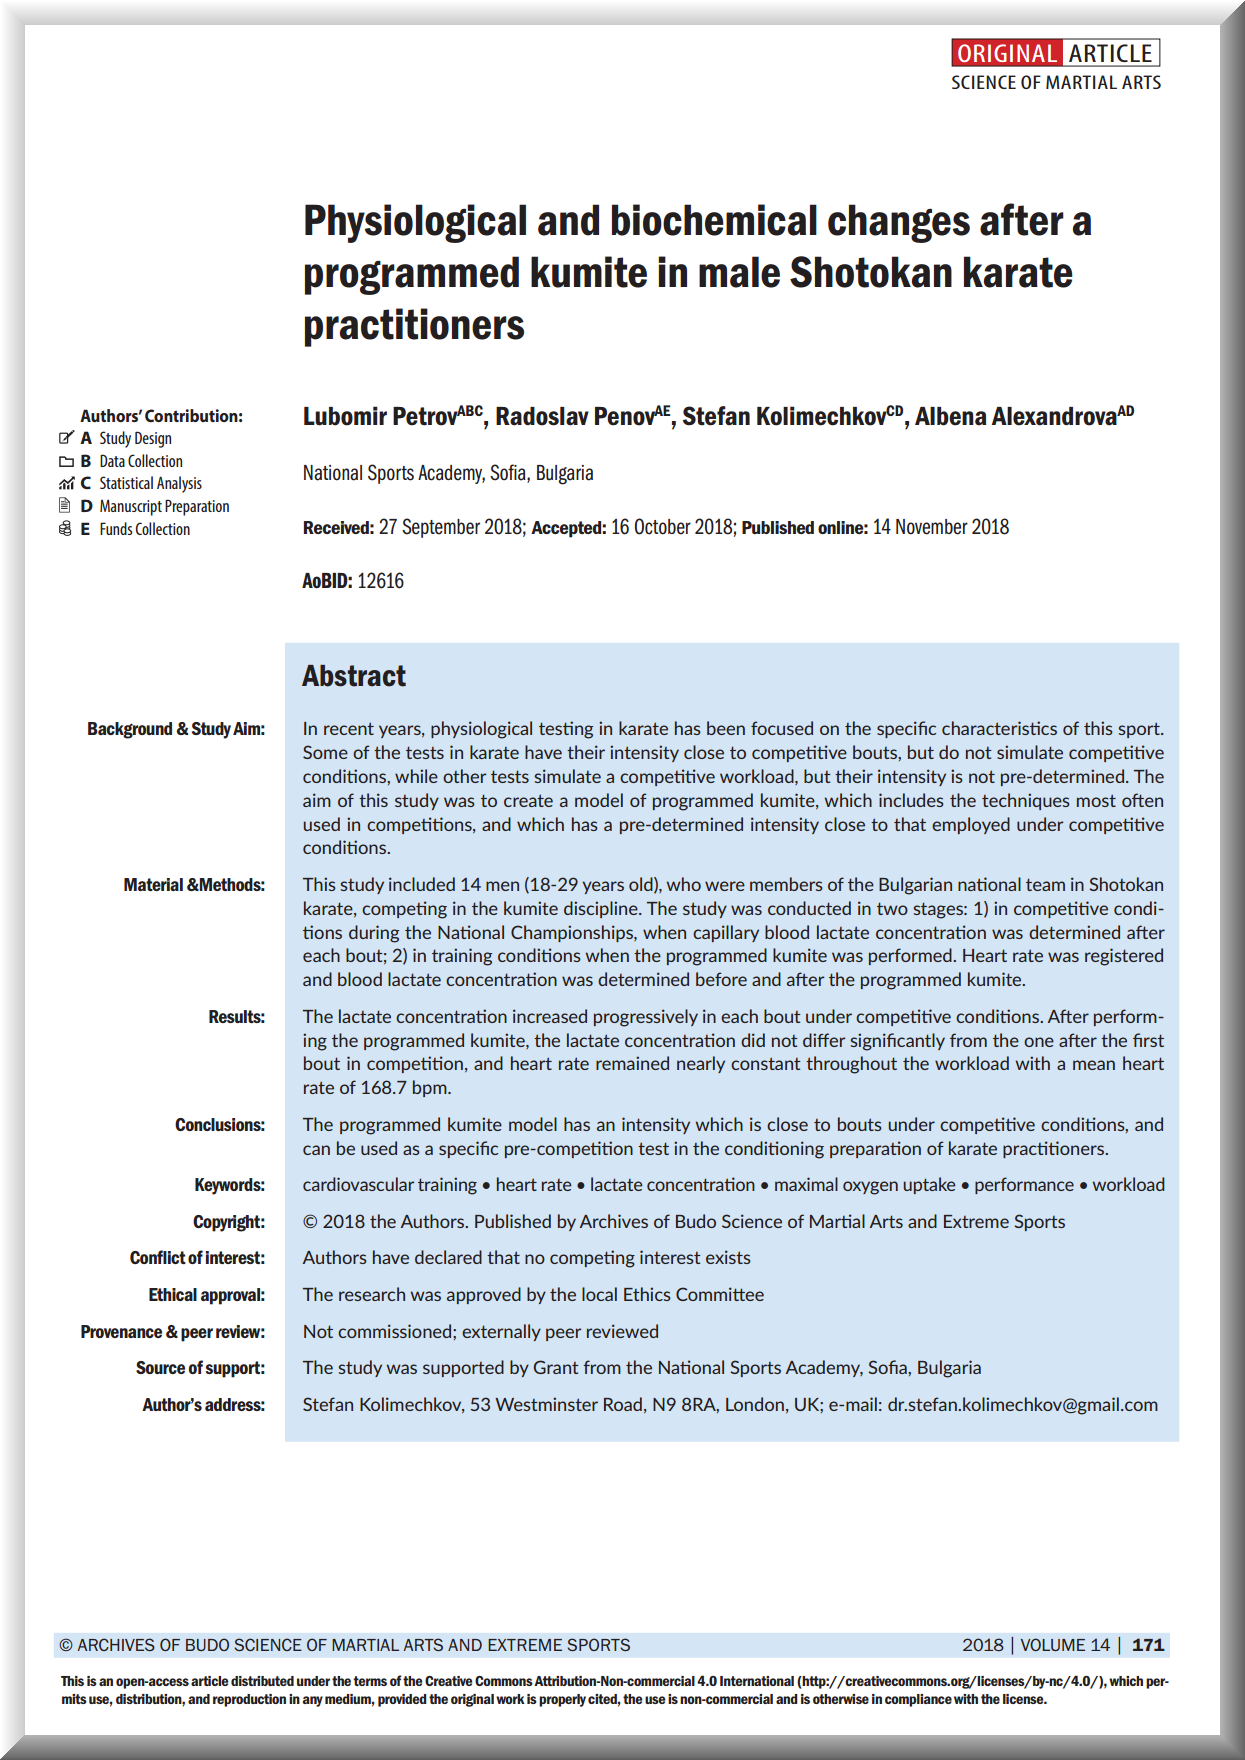 Physiological and Biochemical Changes After a Programmed Kumite in Male Shotokan Karate Practitioners (2018)